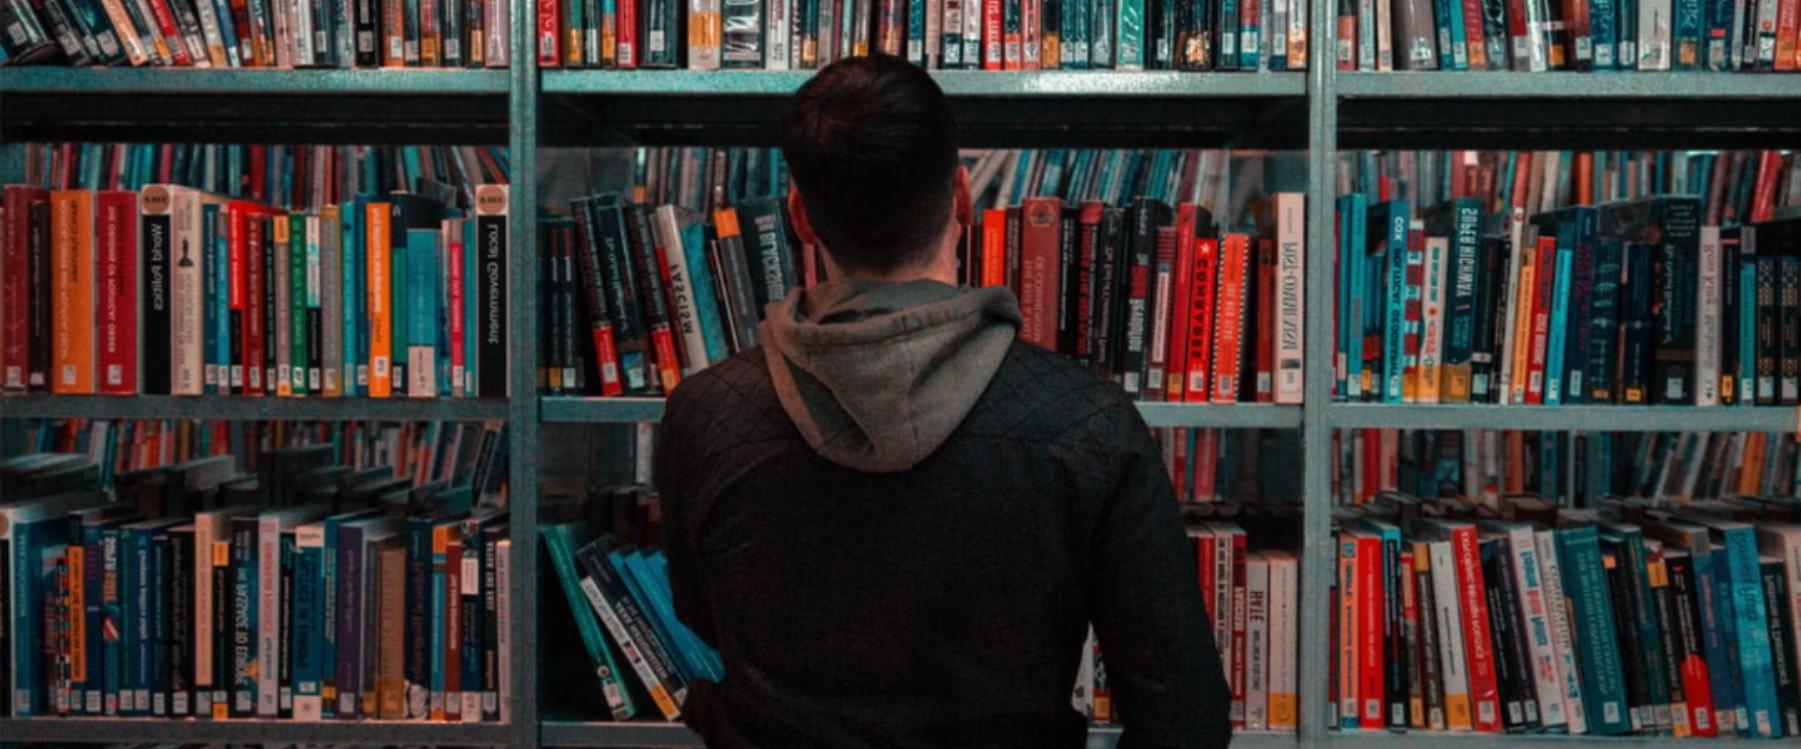 Student looking at books on a shelf